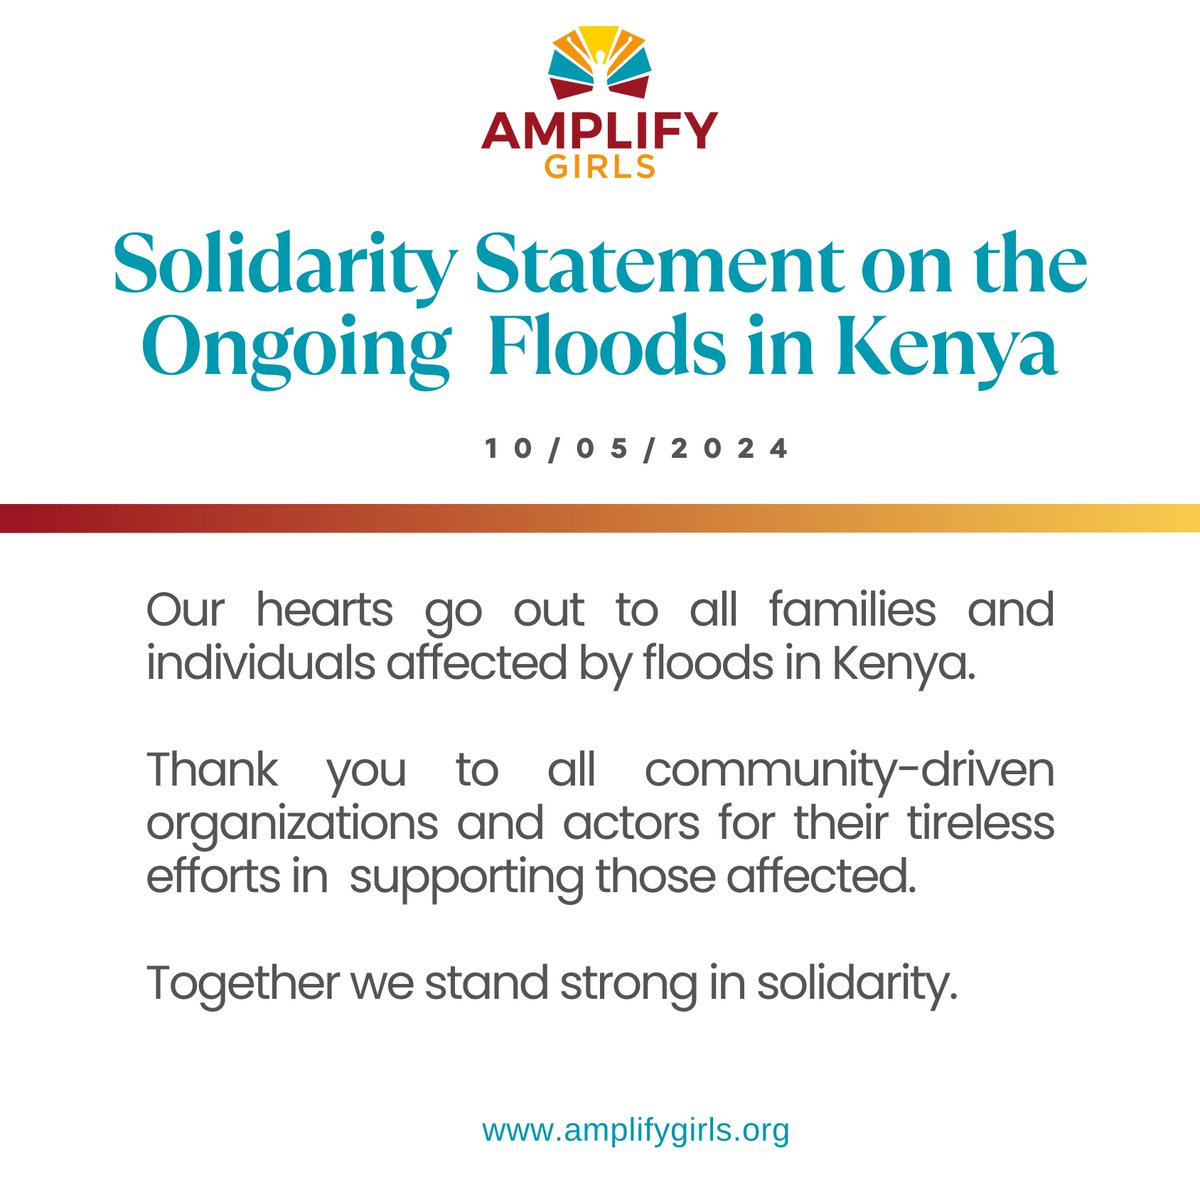 Our hearts go out to all individuals affected by floods in Kenya. In times like these, the efforts of community organizations shines through. Thank you to these organizations and all actors at the front lines for their tireless efforts in supporting those affected. #AMPLIFYHer